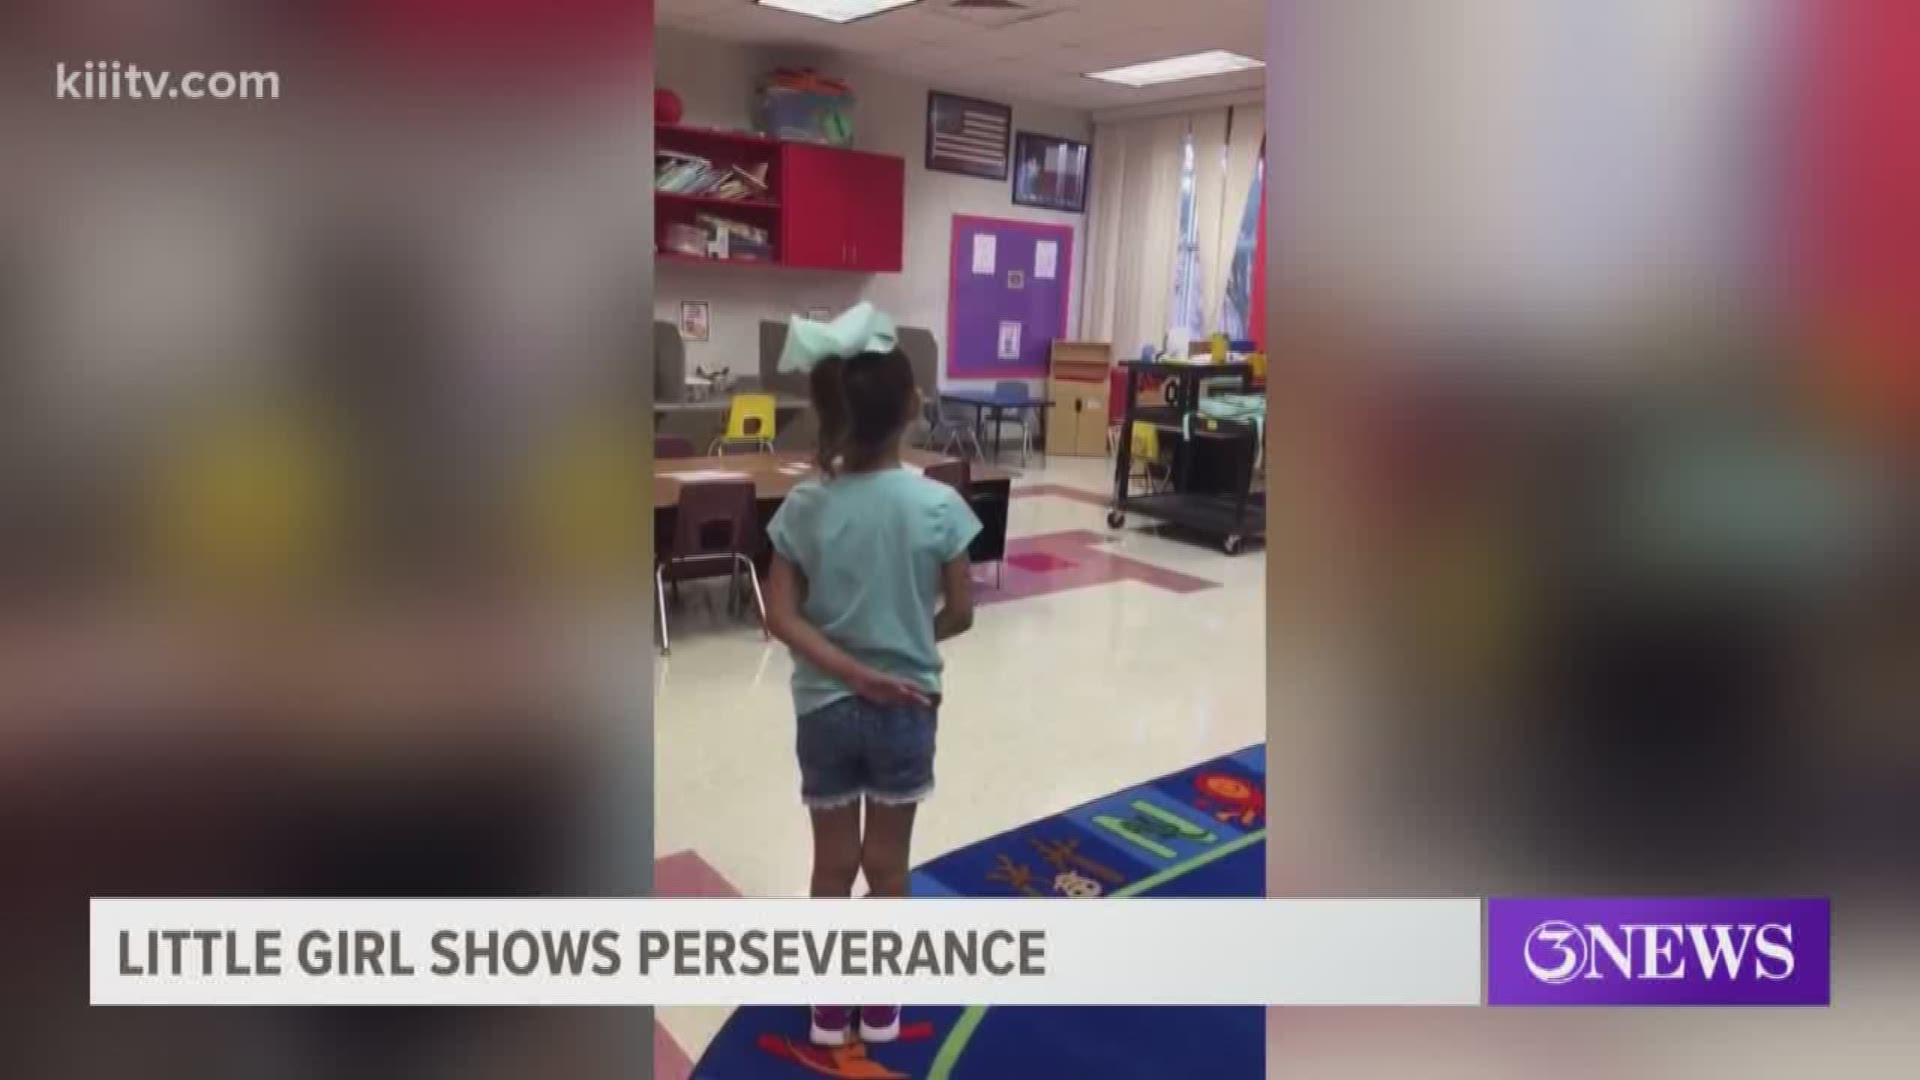 A six-year-old girl was recently diagnosed with a form of autism called Asperger's syndrome. Her parents didn't even know about the disorder until she started school.